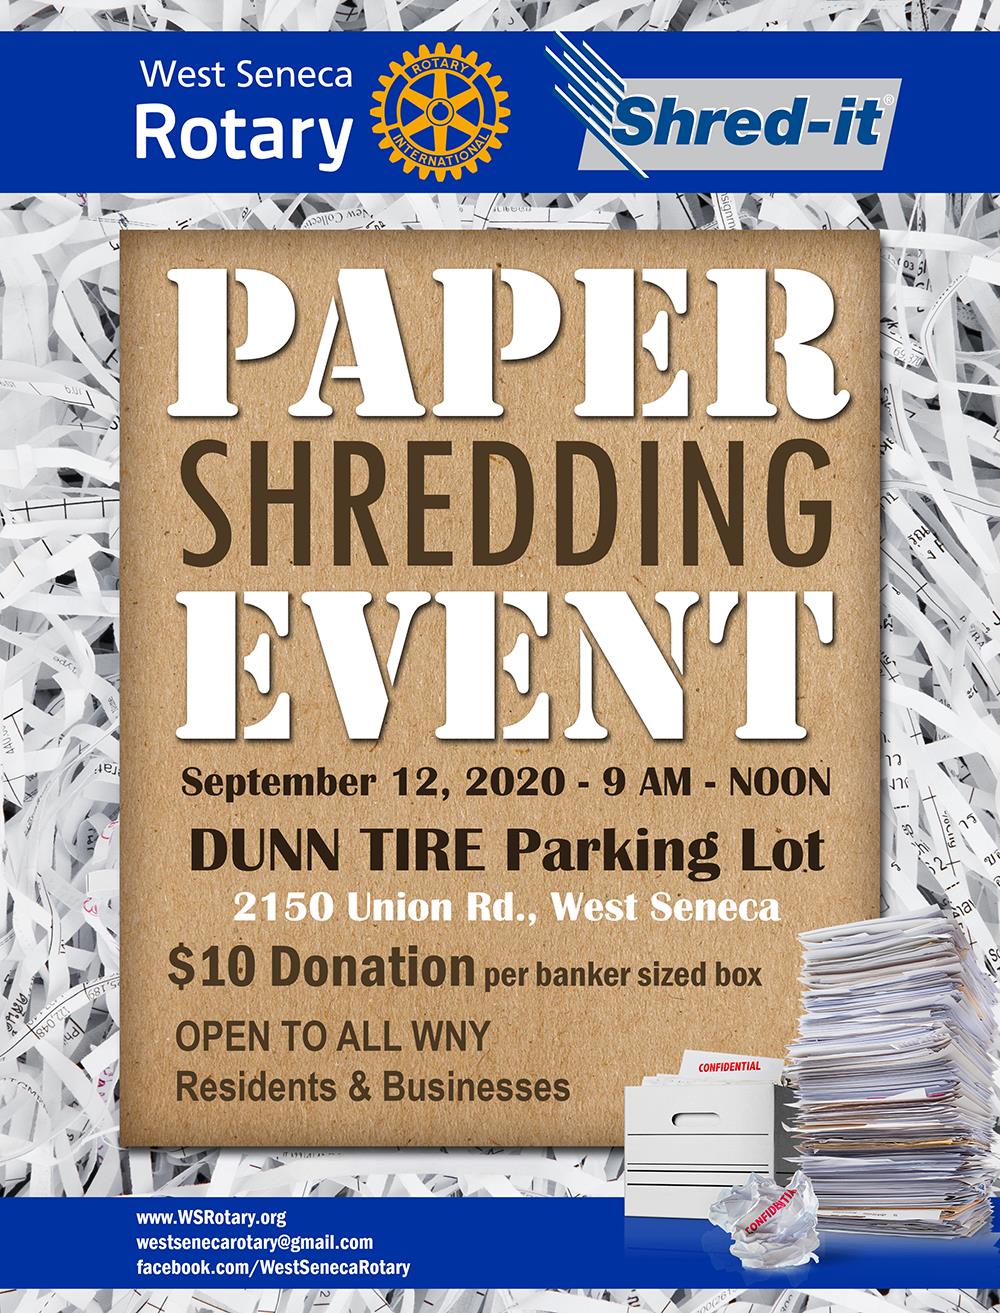 shred it events